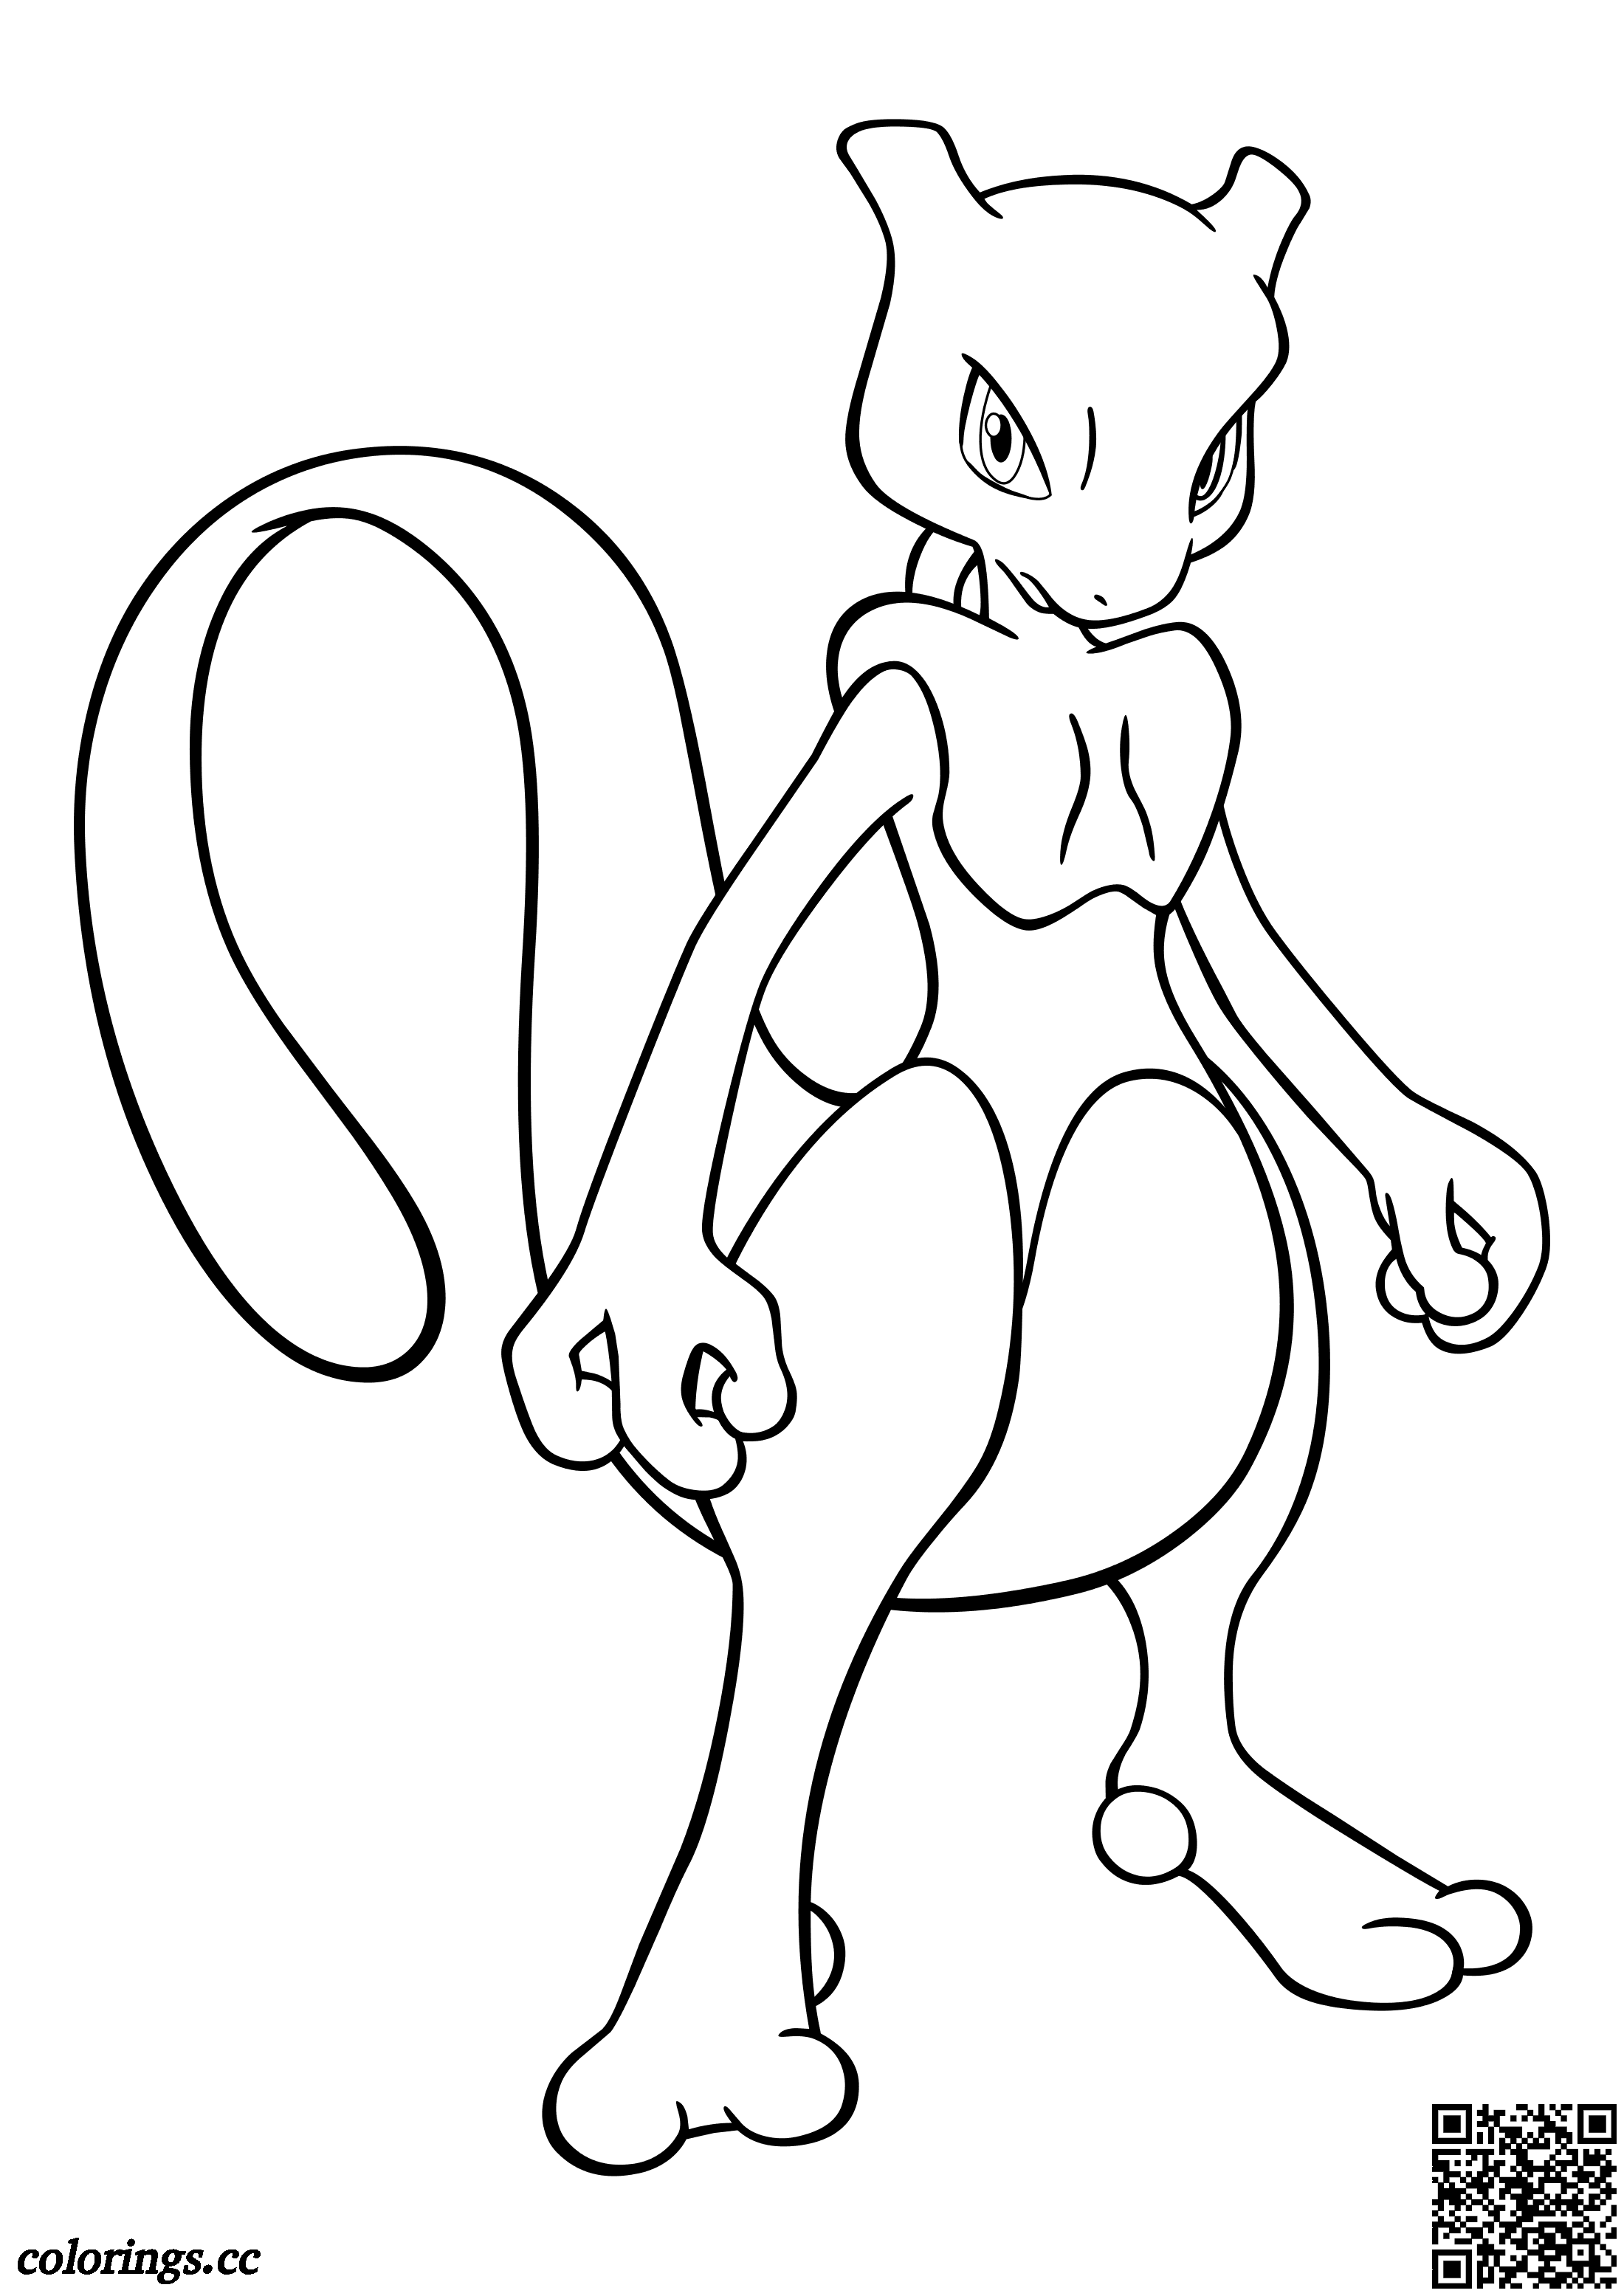 150 - Mewtwo coloring pages, Pokemon coloring pages - Colorings.cc